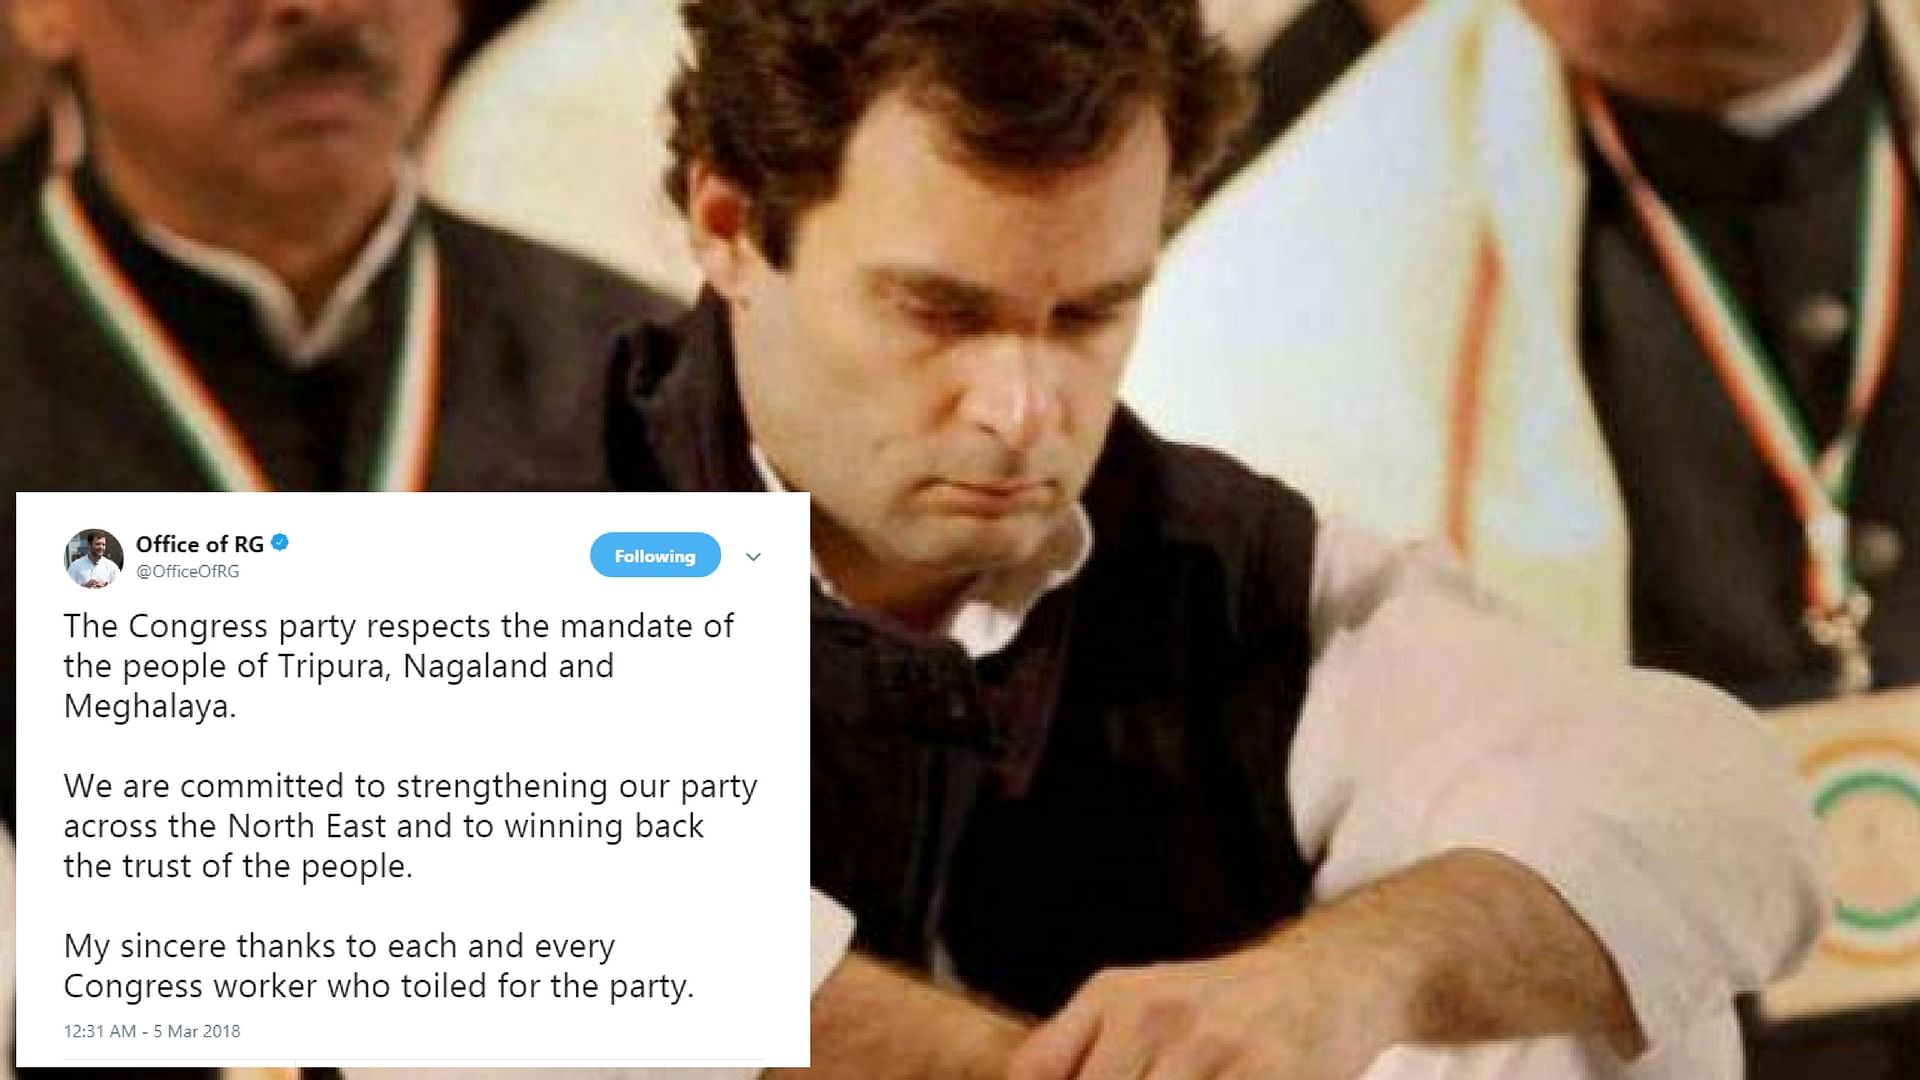 Rahul Gandhi said the Congress would now focus on ‘winning back the trust of the people’.